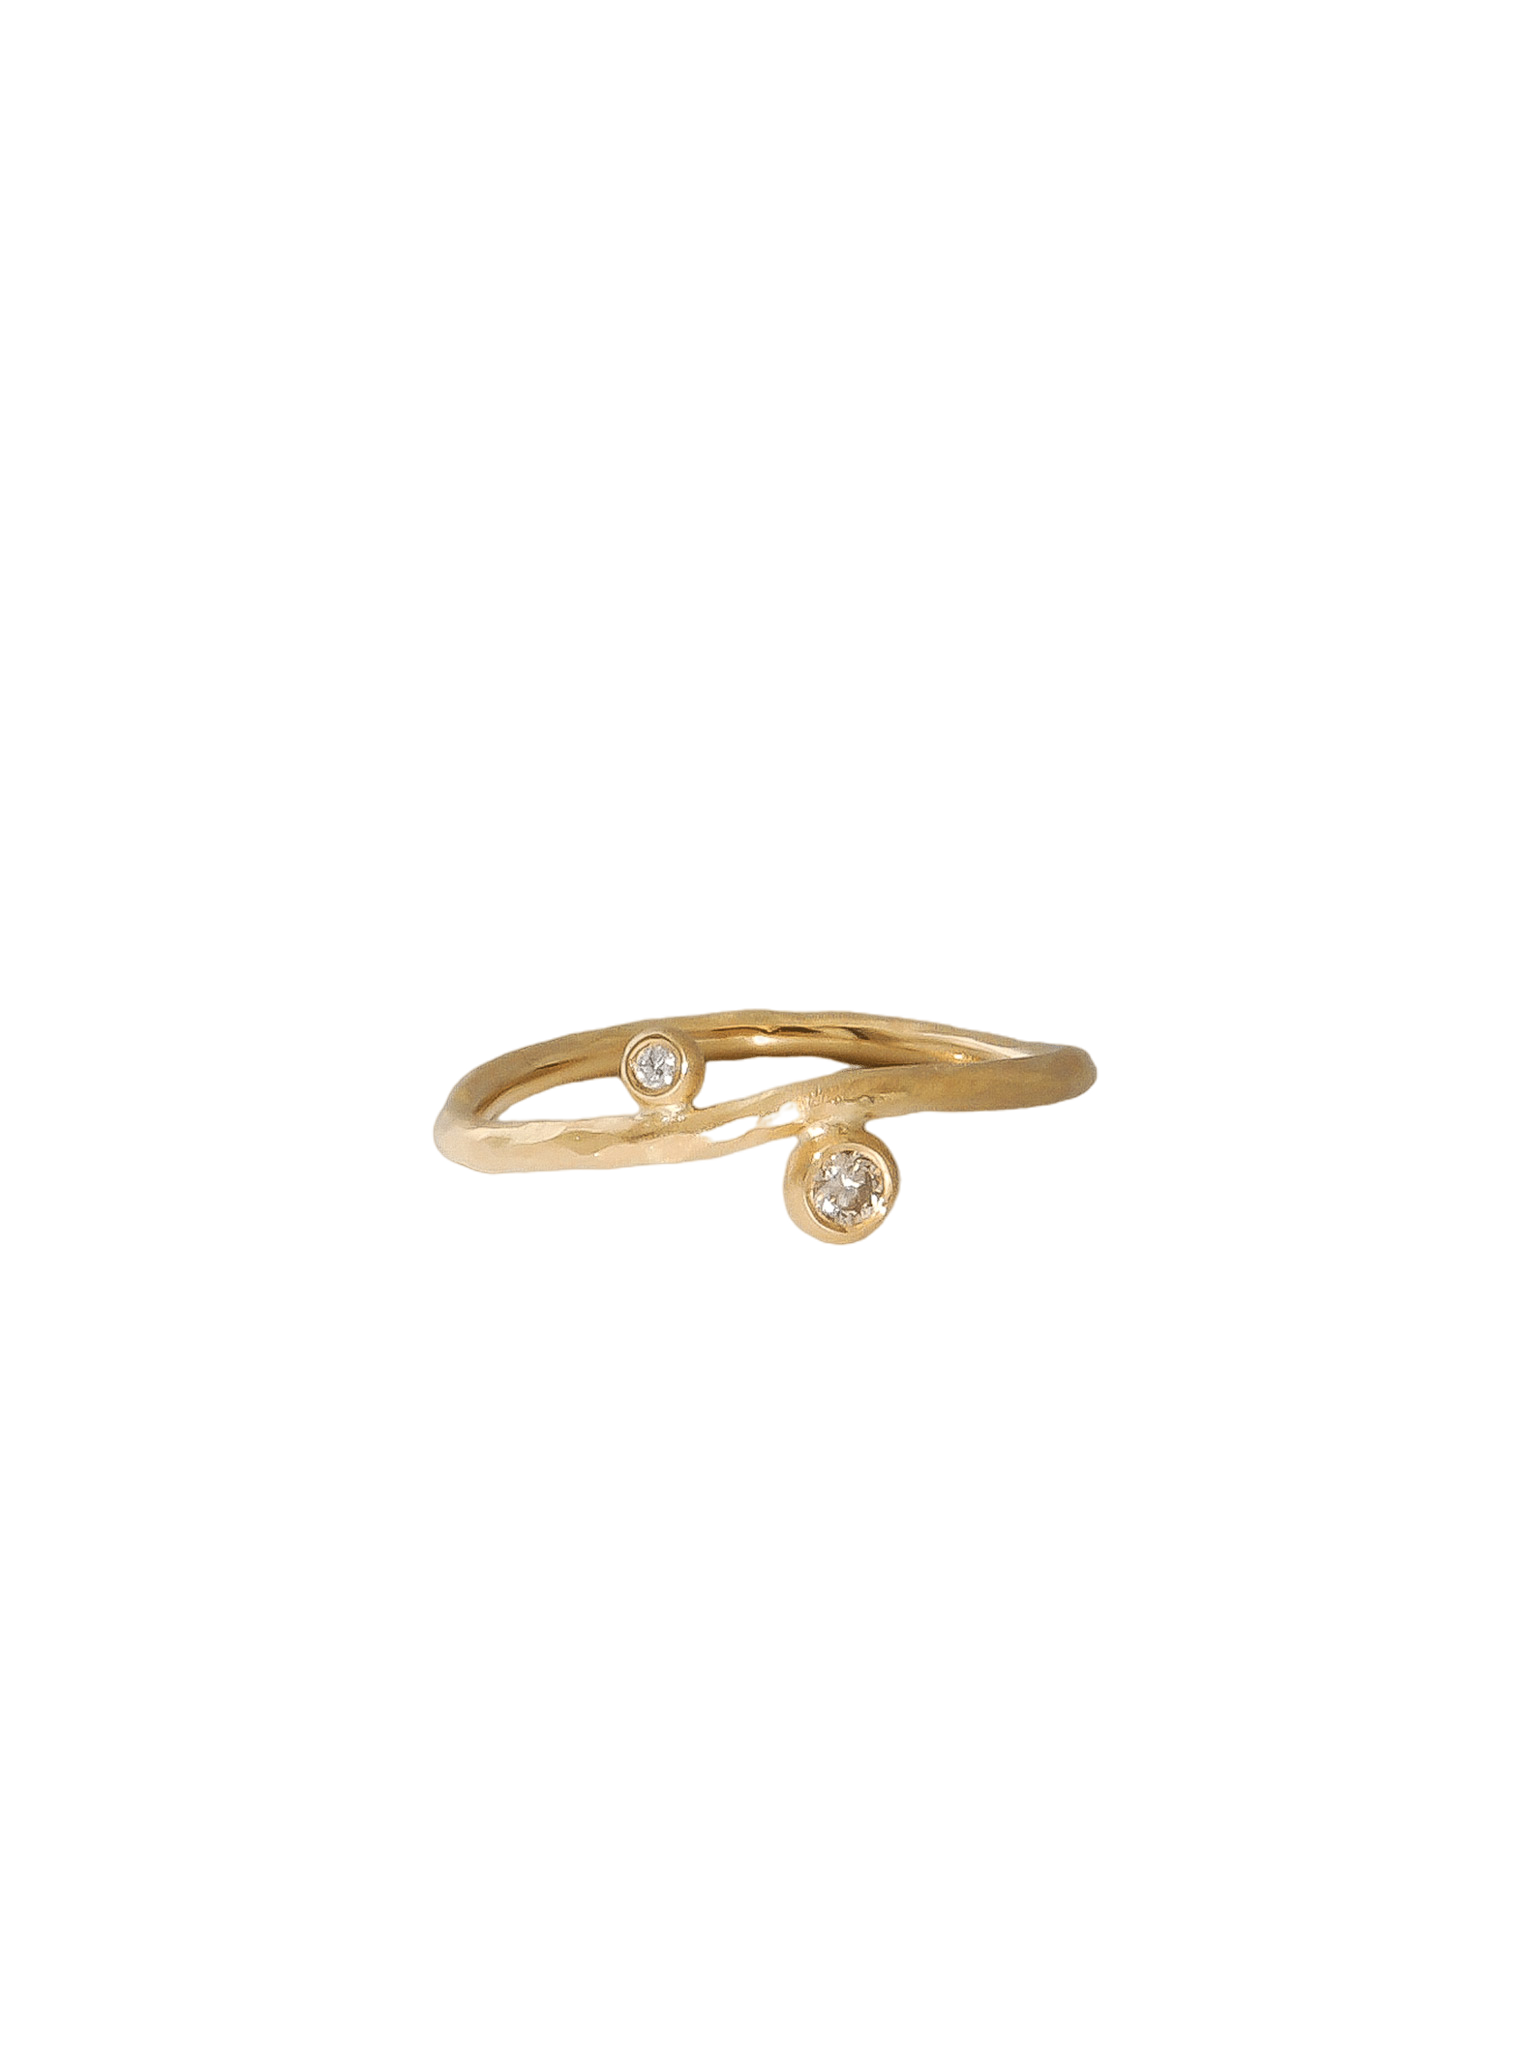 Textured gold ring with diamonds 